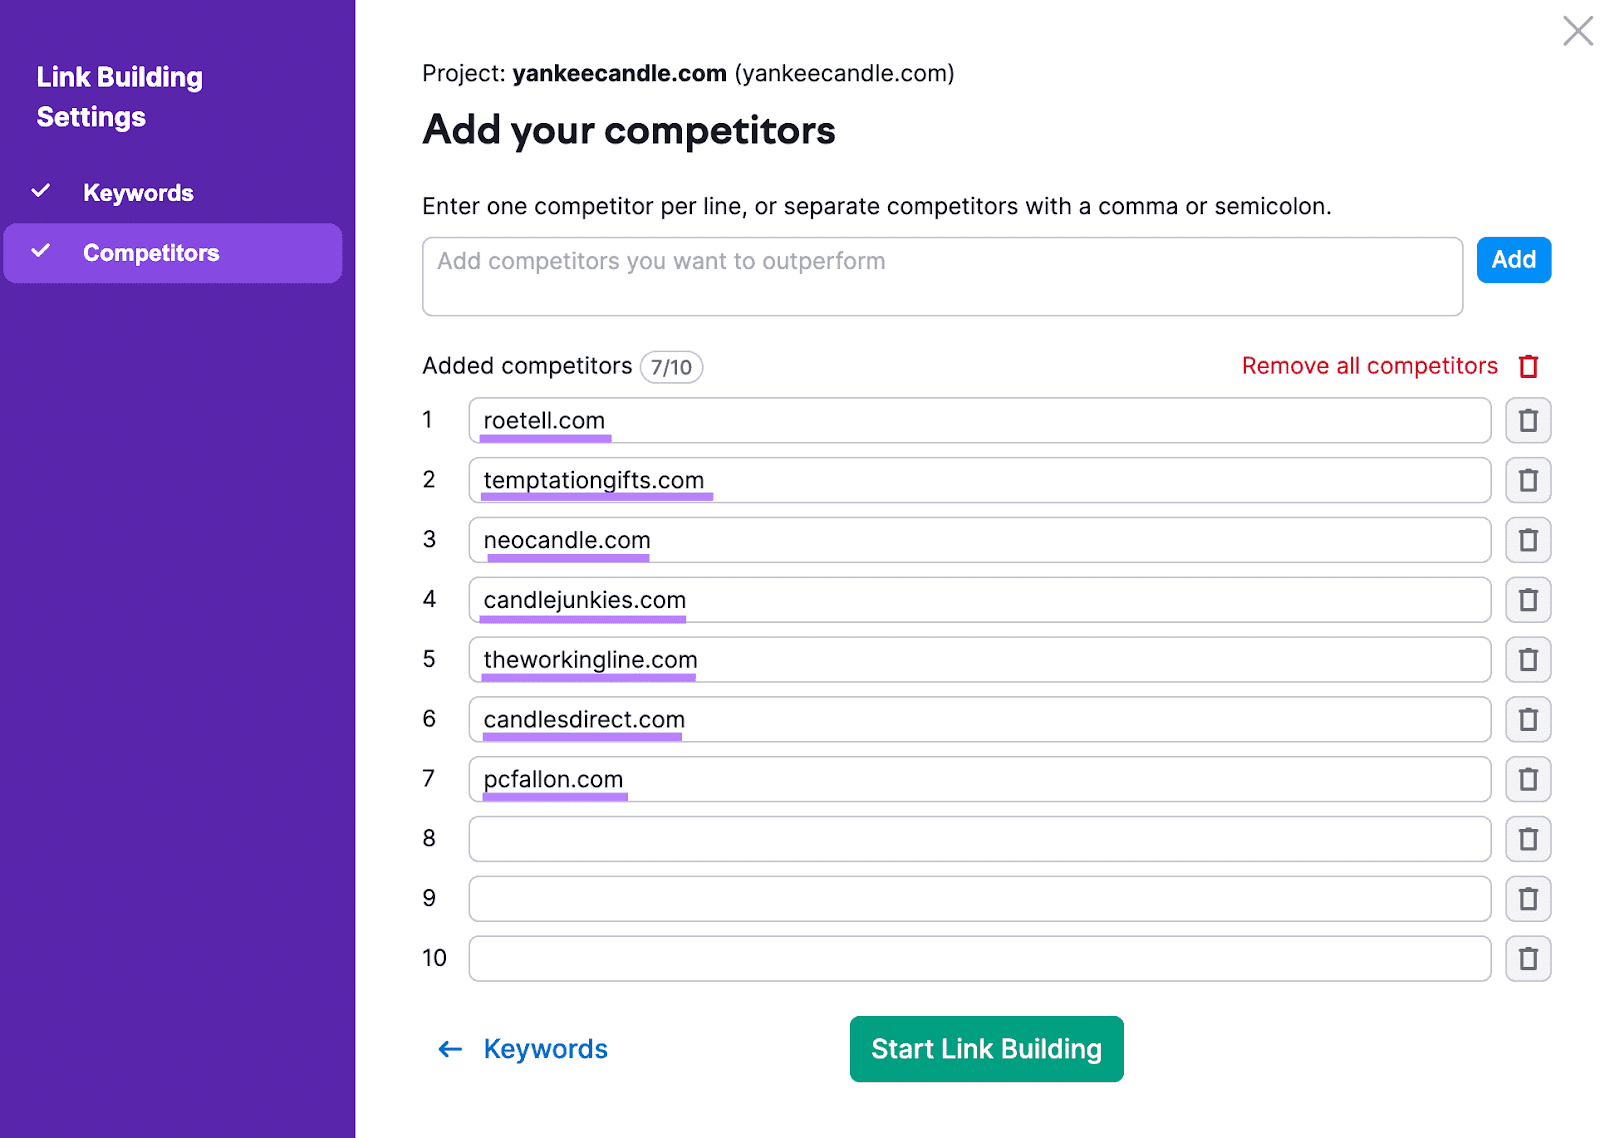 "Add your competitors" window in Link Building Settings